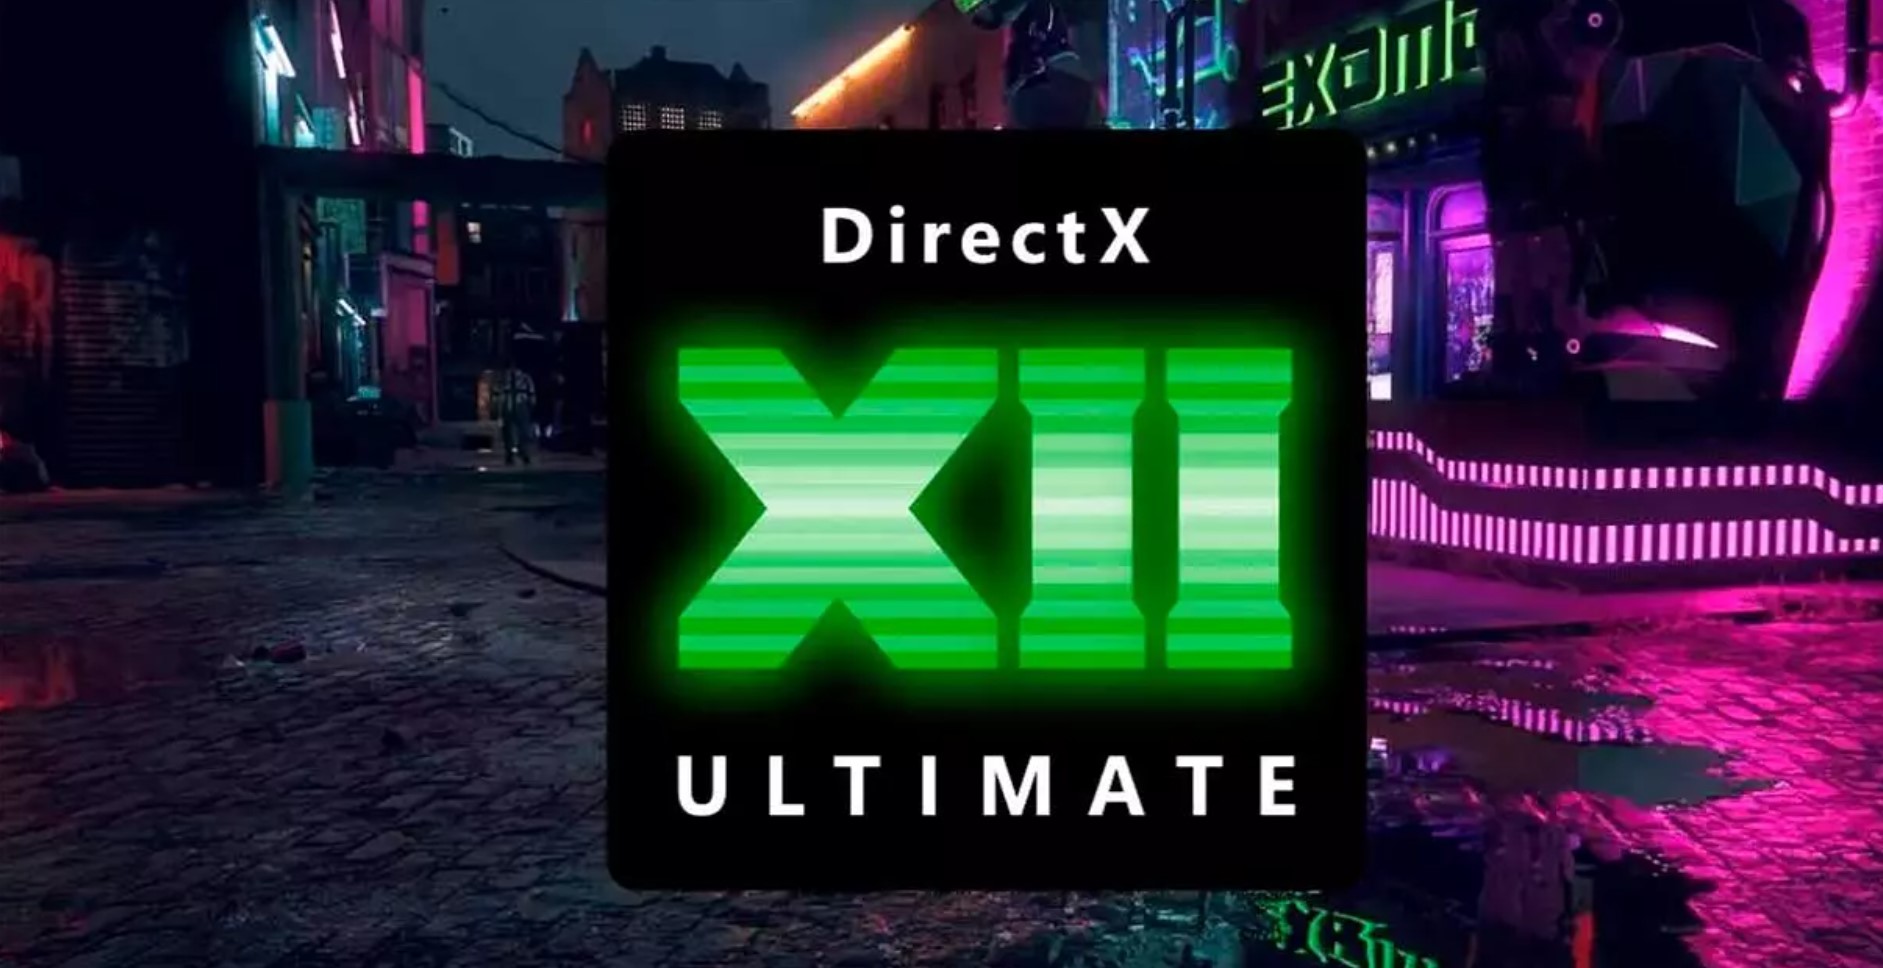 Enhanced Gaming Features in Windows 11: DirectX 12 Ultimate and Auto HDR